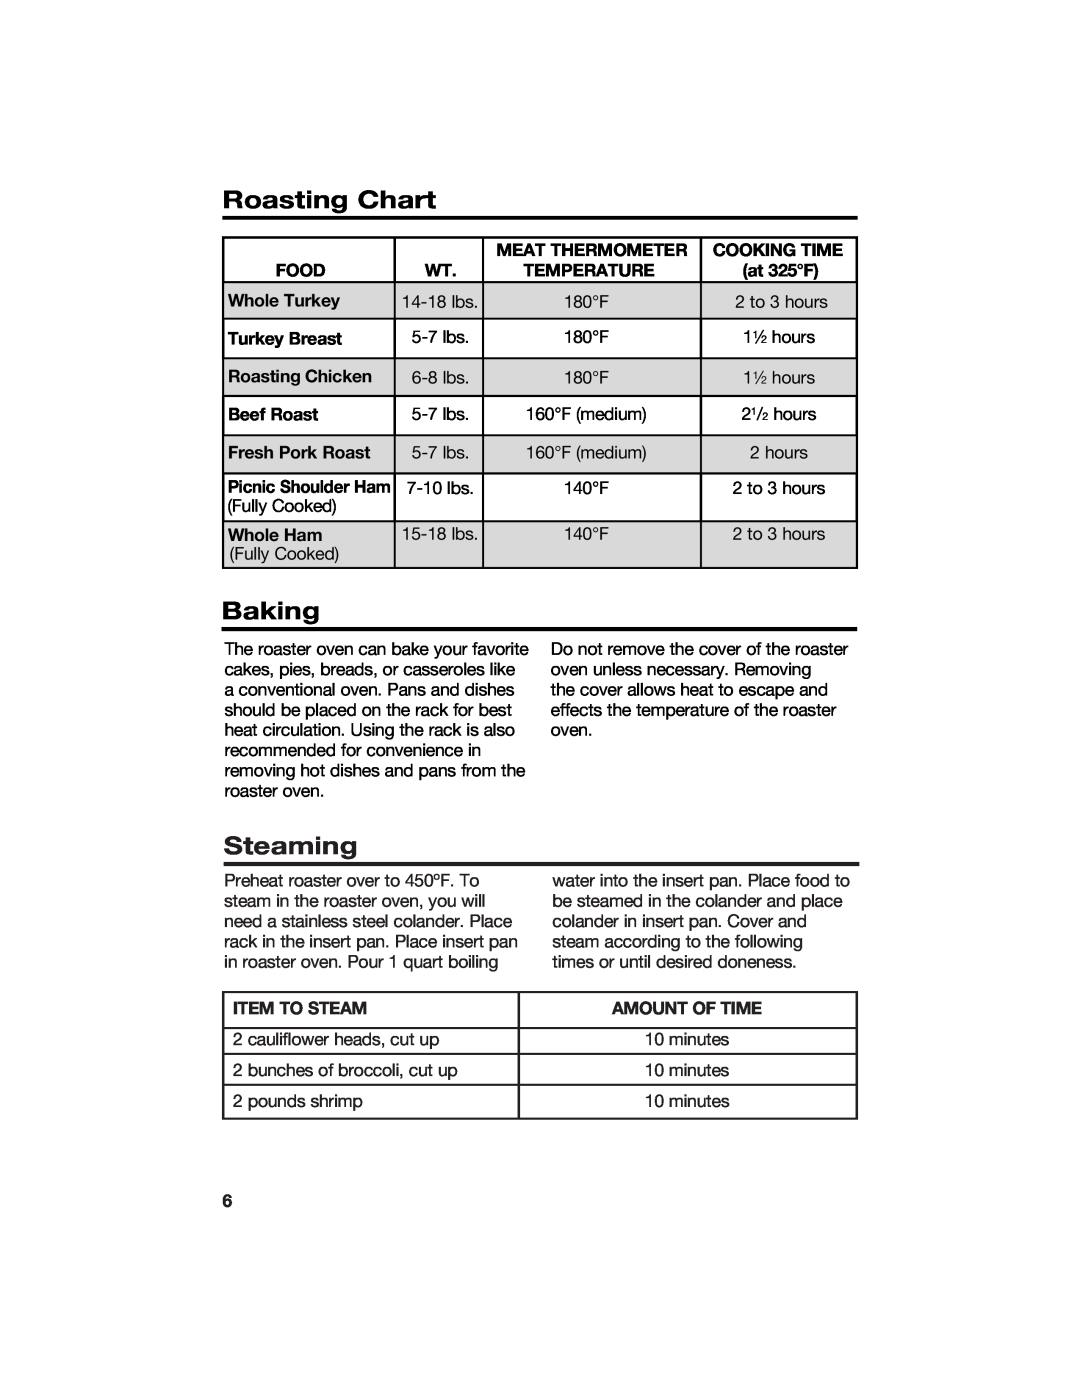 Hamilton Beach 840104300 Roasting Chart, Baking, Steaming, Meat Thermometer, Cooking Time, Food, Temperature, at 325F 